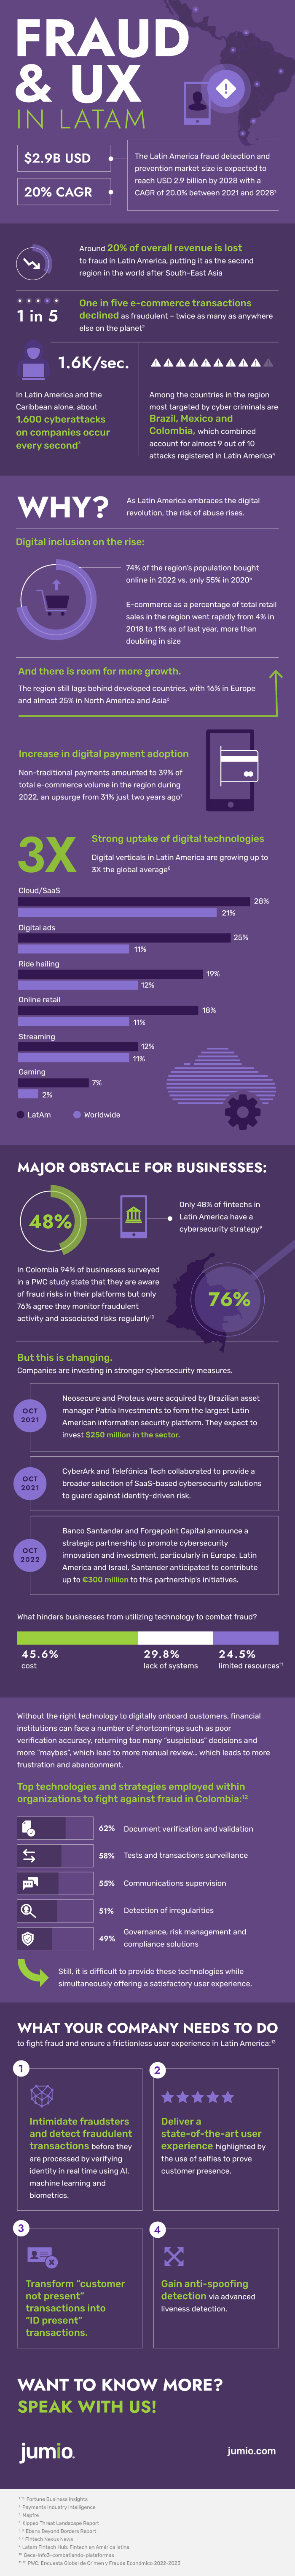 This infographic highlights the key issues LATAM companies face to ensure they keep fraudsters out while providing a great experience for their legitimate customers. A text version of the infographic is available on the page.